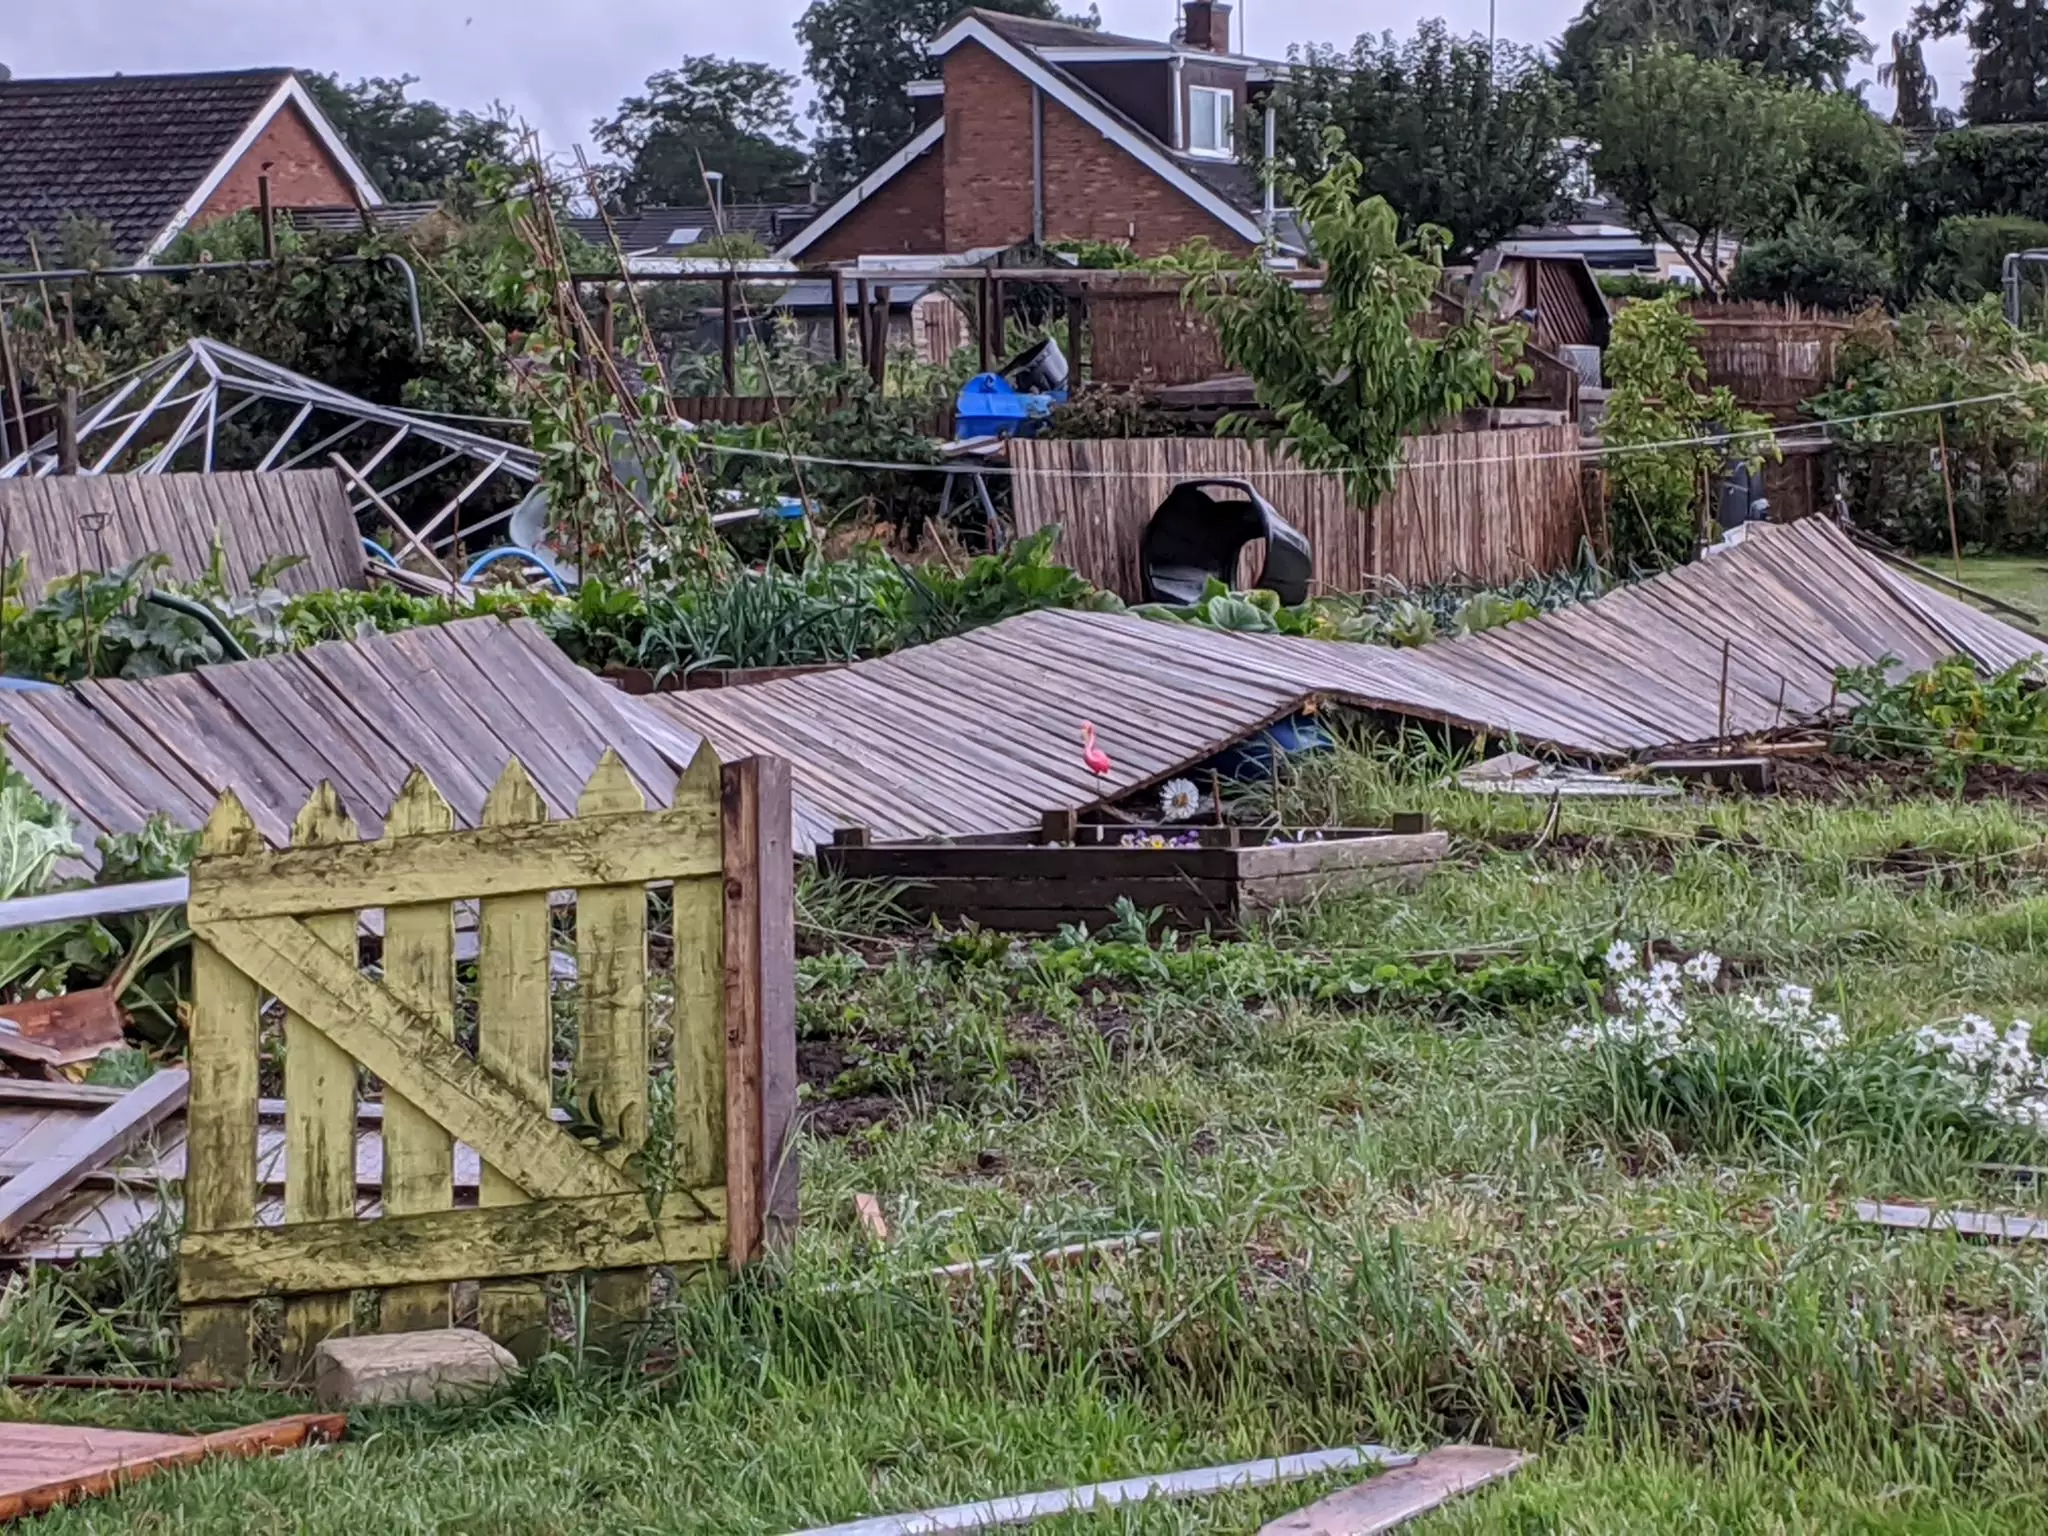 A local allotment was trashed.